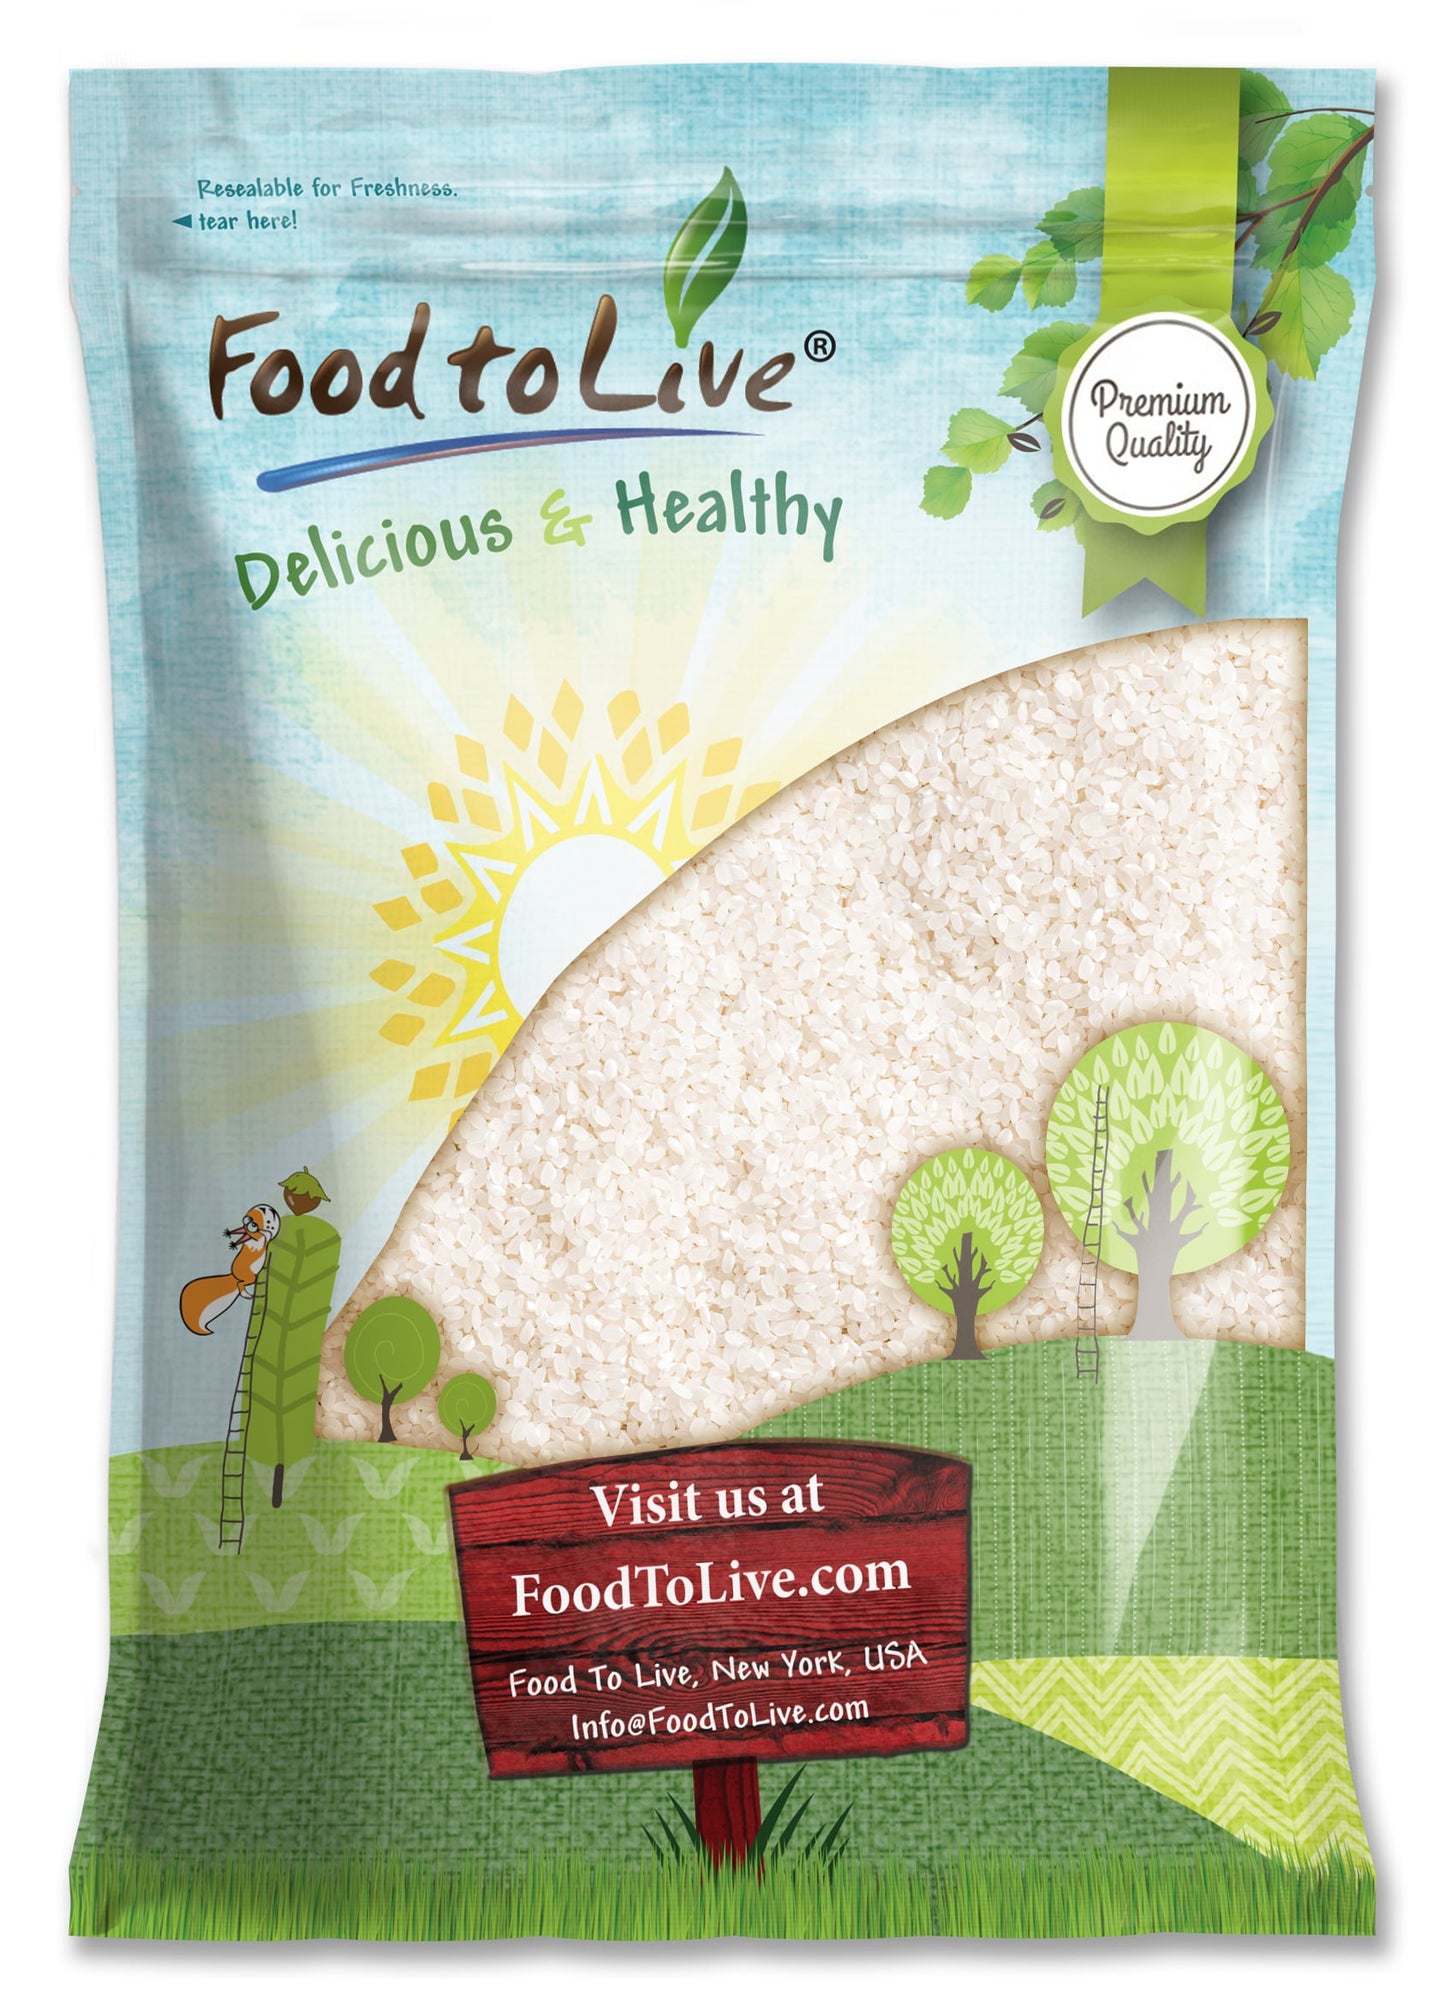 White Calrose Rice — Medium-Grain Rice, Soft and Sticky Texture, Vegan, Kosher, Bulk. Low in Fat. Great as a Side Dish. Perfect for Sushi, Poke, Asian and Mediterranean Meals